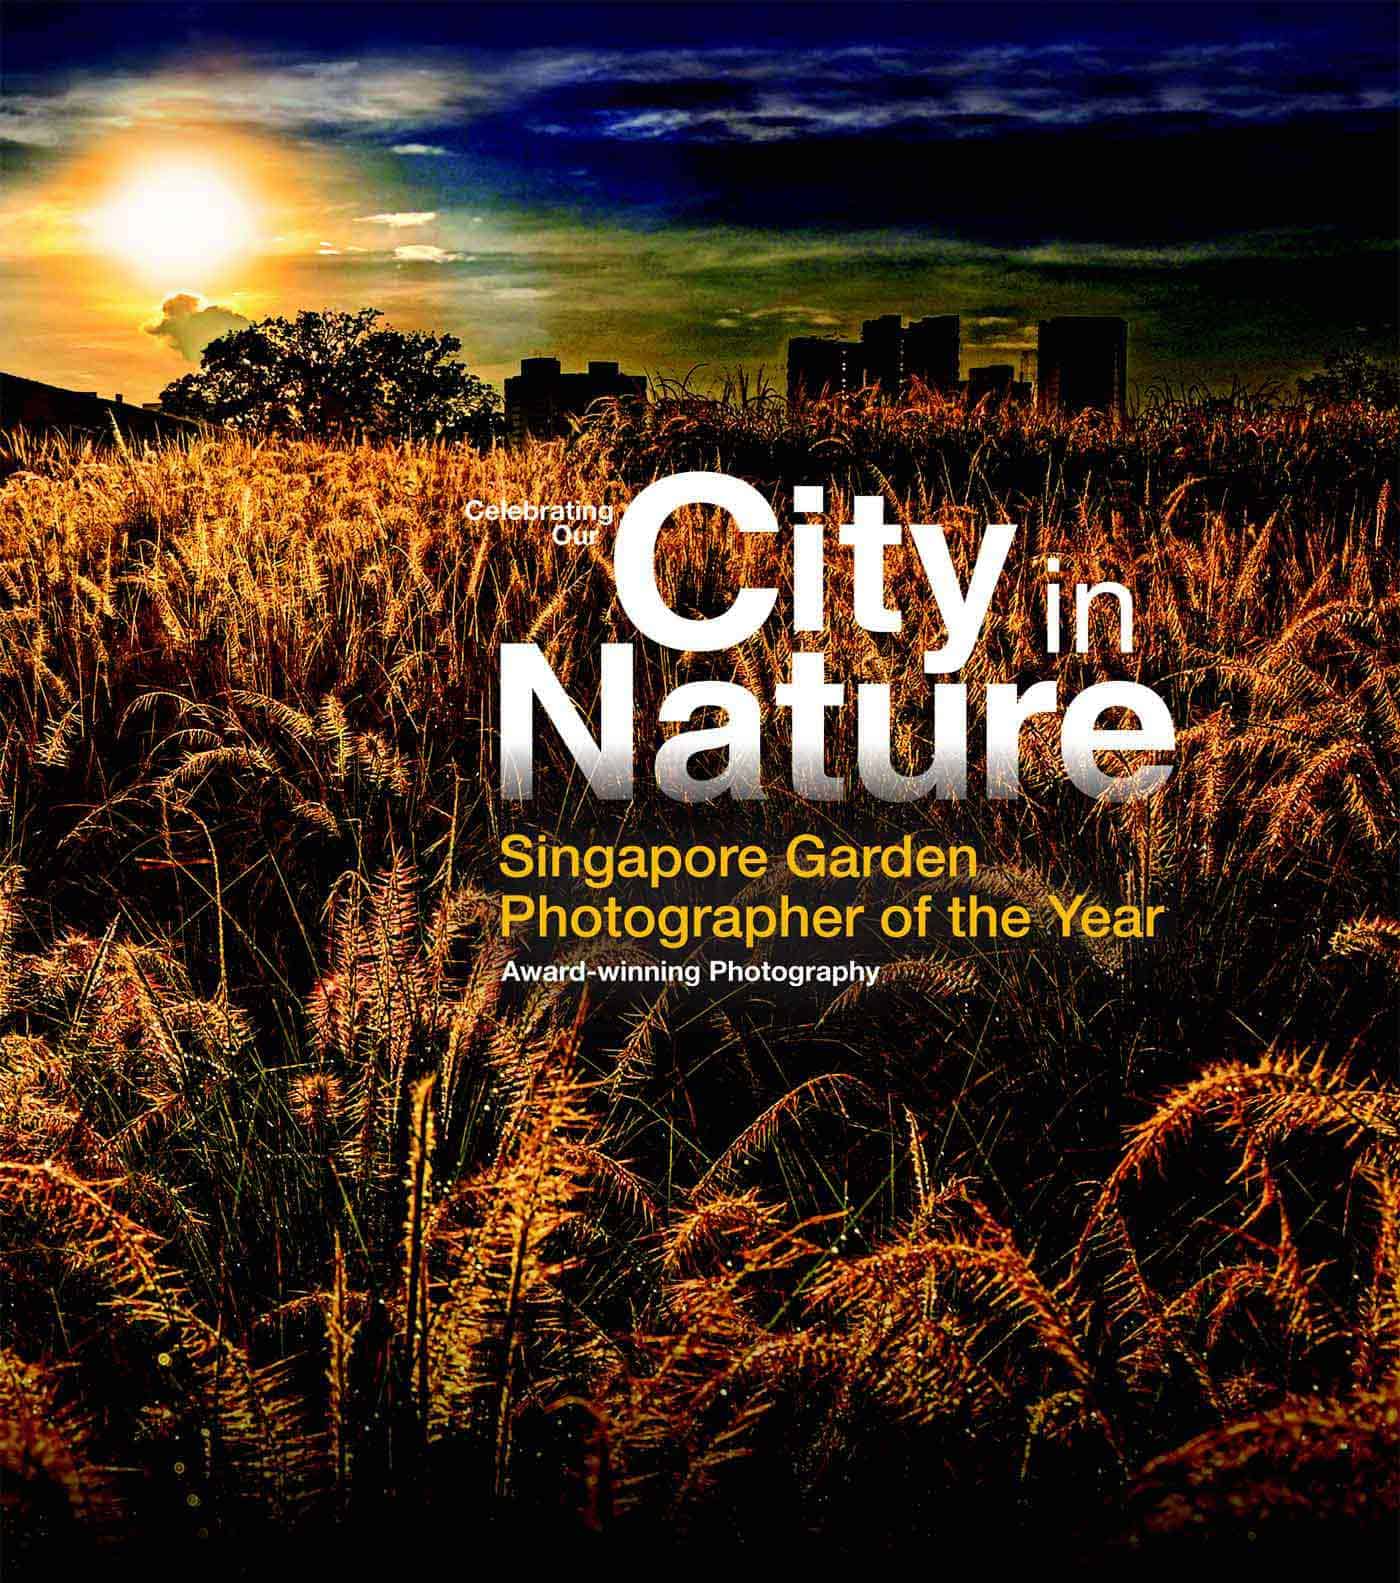 Celebrating Our City in Nature – Singapore Garden Photographer of the Year